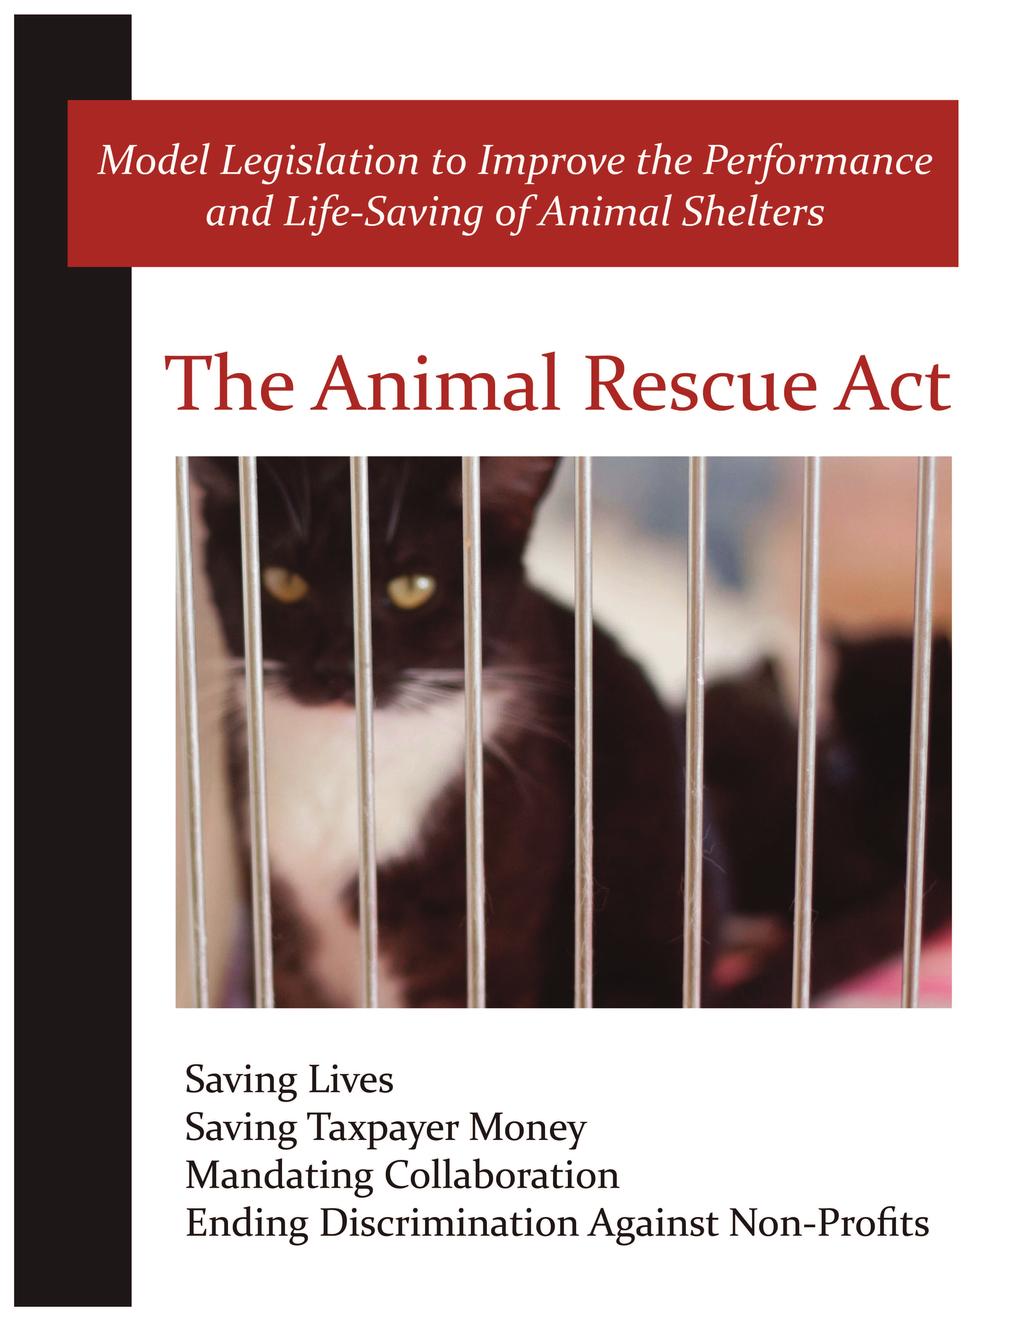 For a copy of the Companion Animal Protection Act, our model shelter reform law which